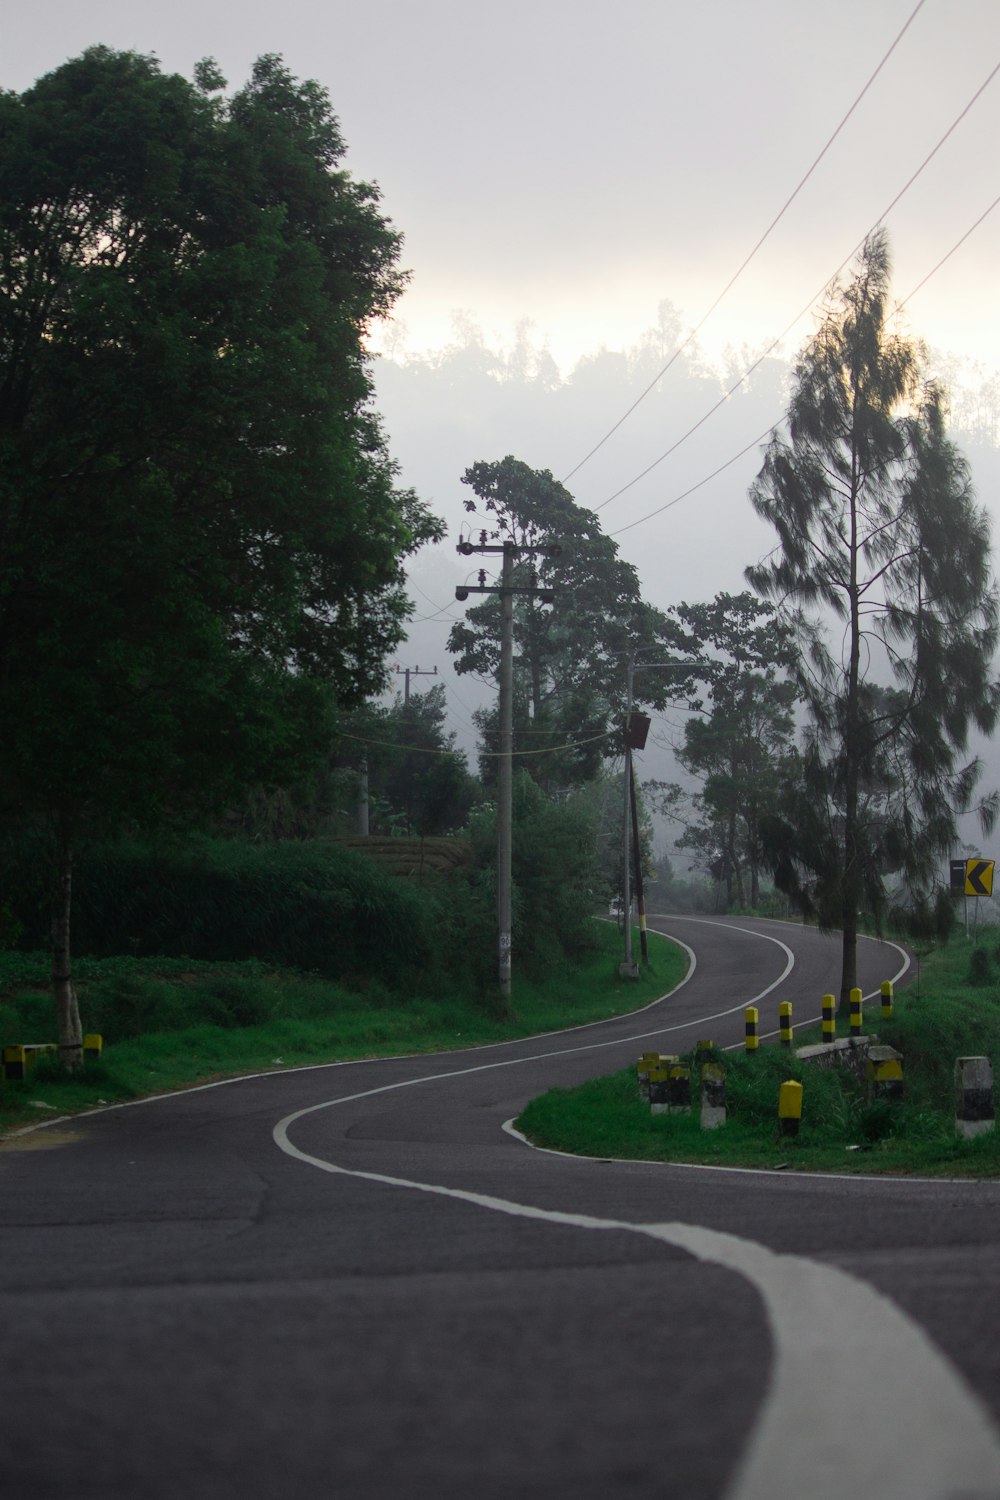 a curve in the road with power lines above it